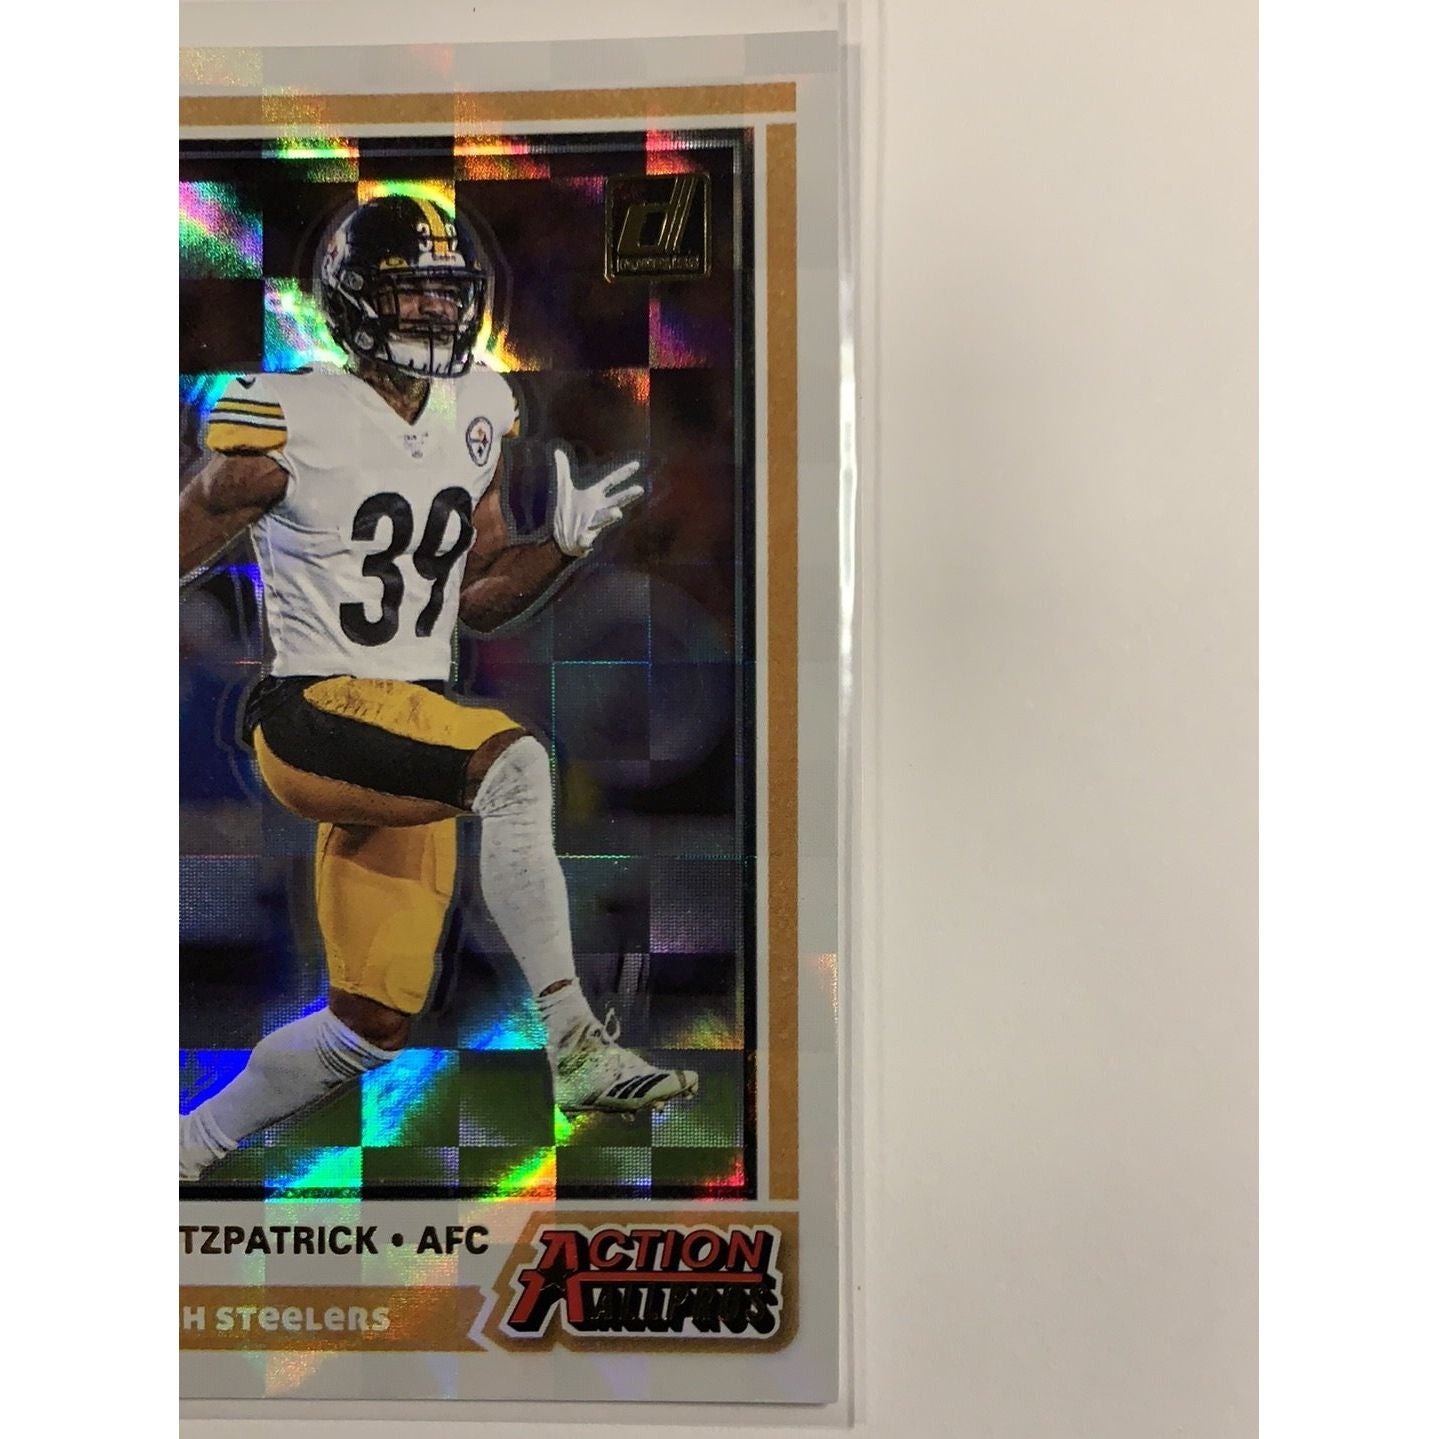  2020 Donruss Minkah Fitzpatrick Action All Pros Refractor  Local Legends Cards & Collectibles